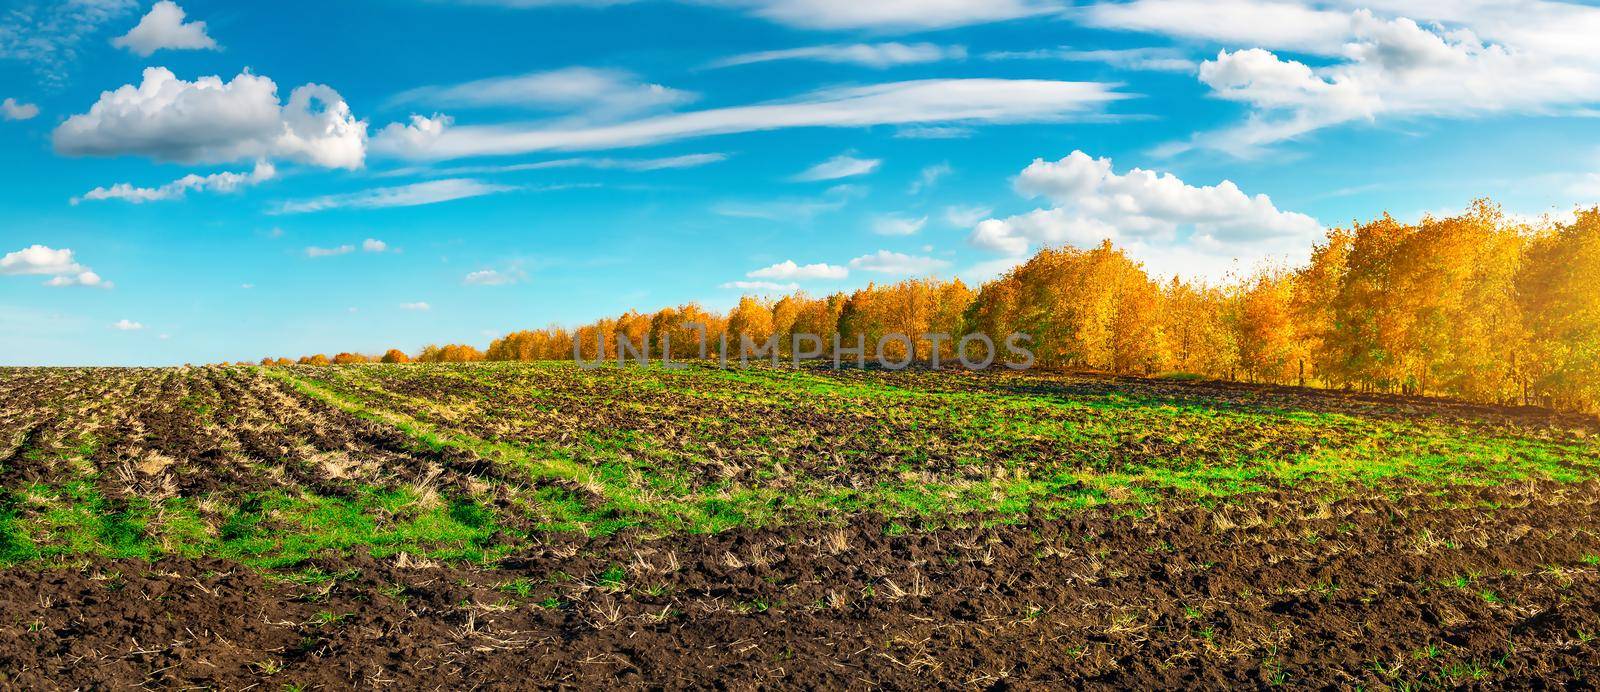 Agro field in autumn by Givaga